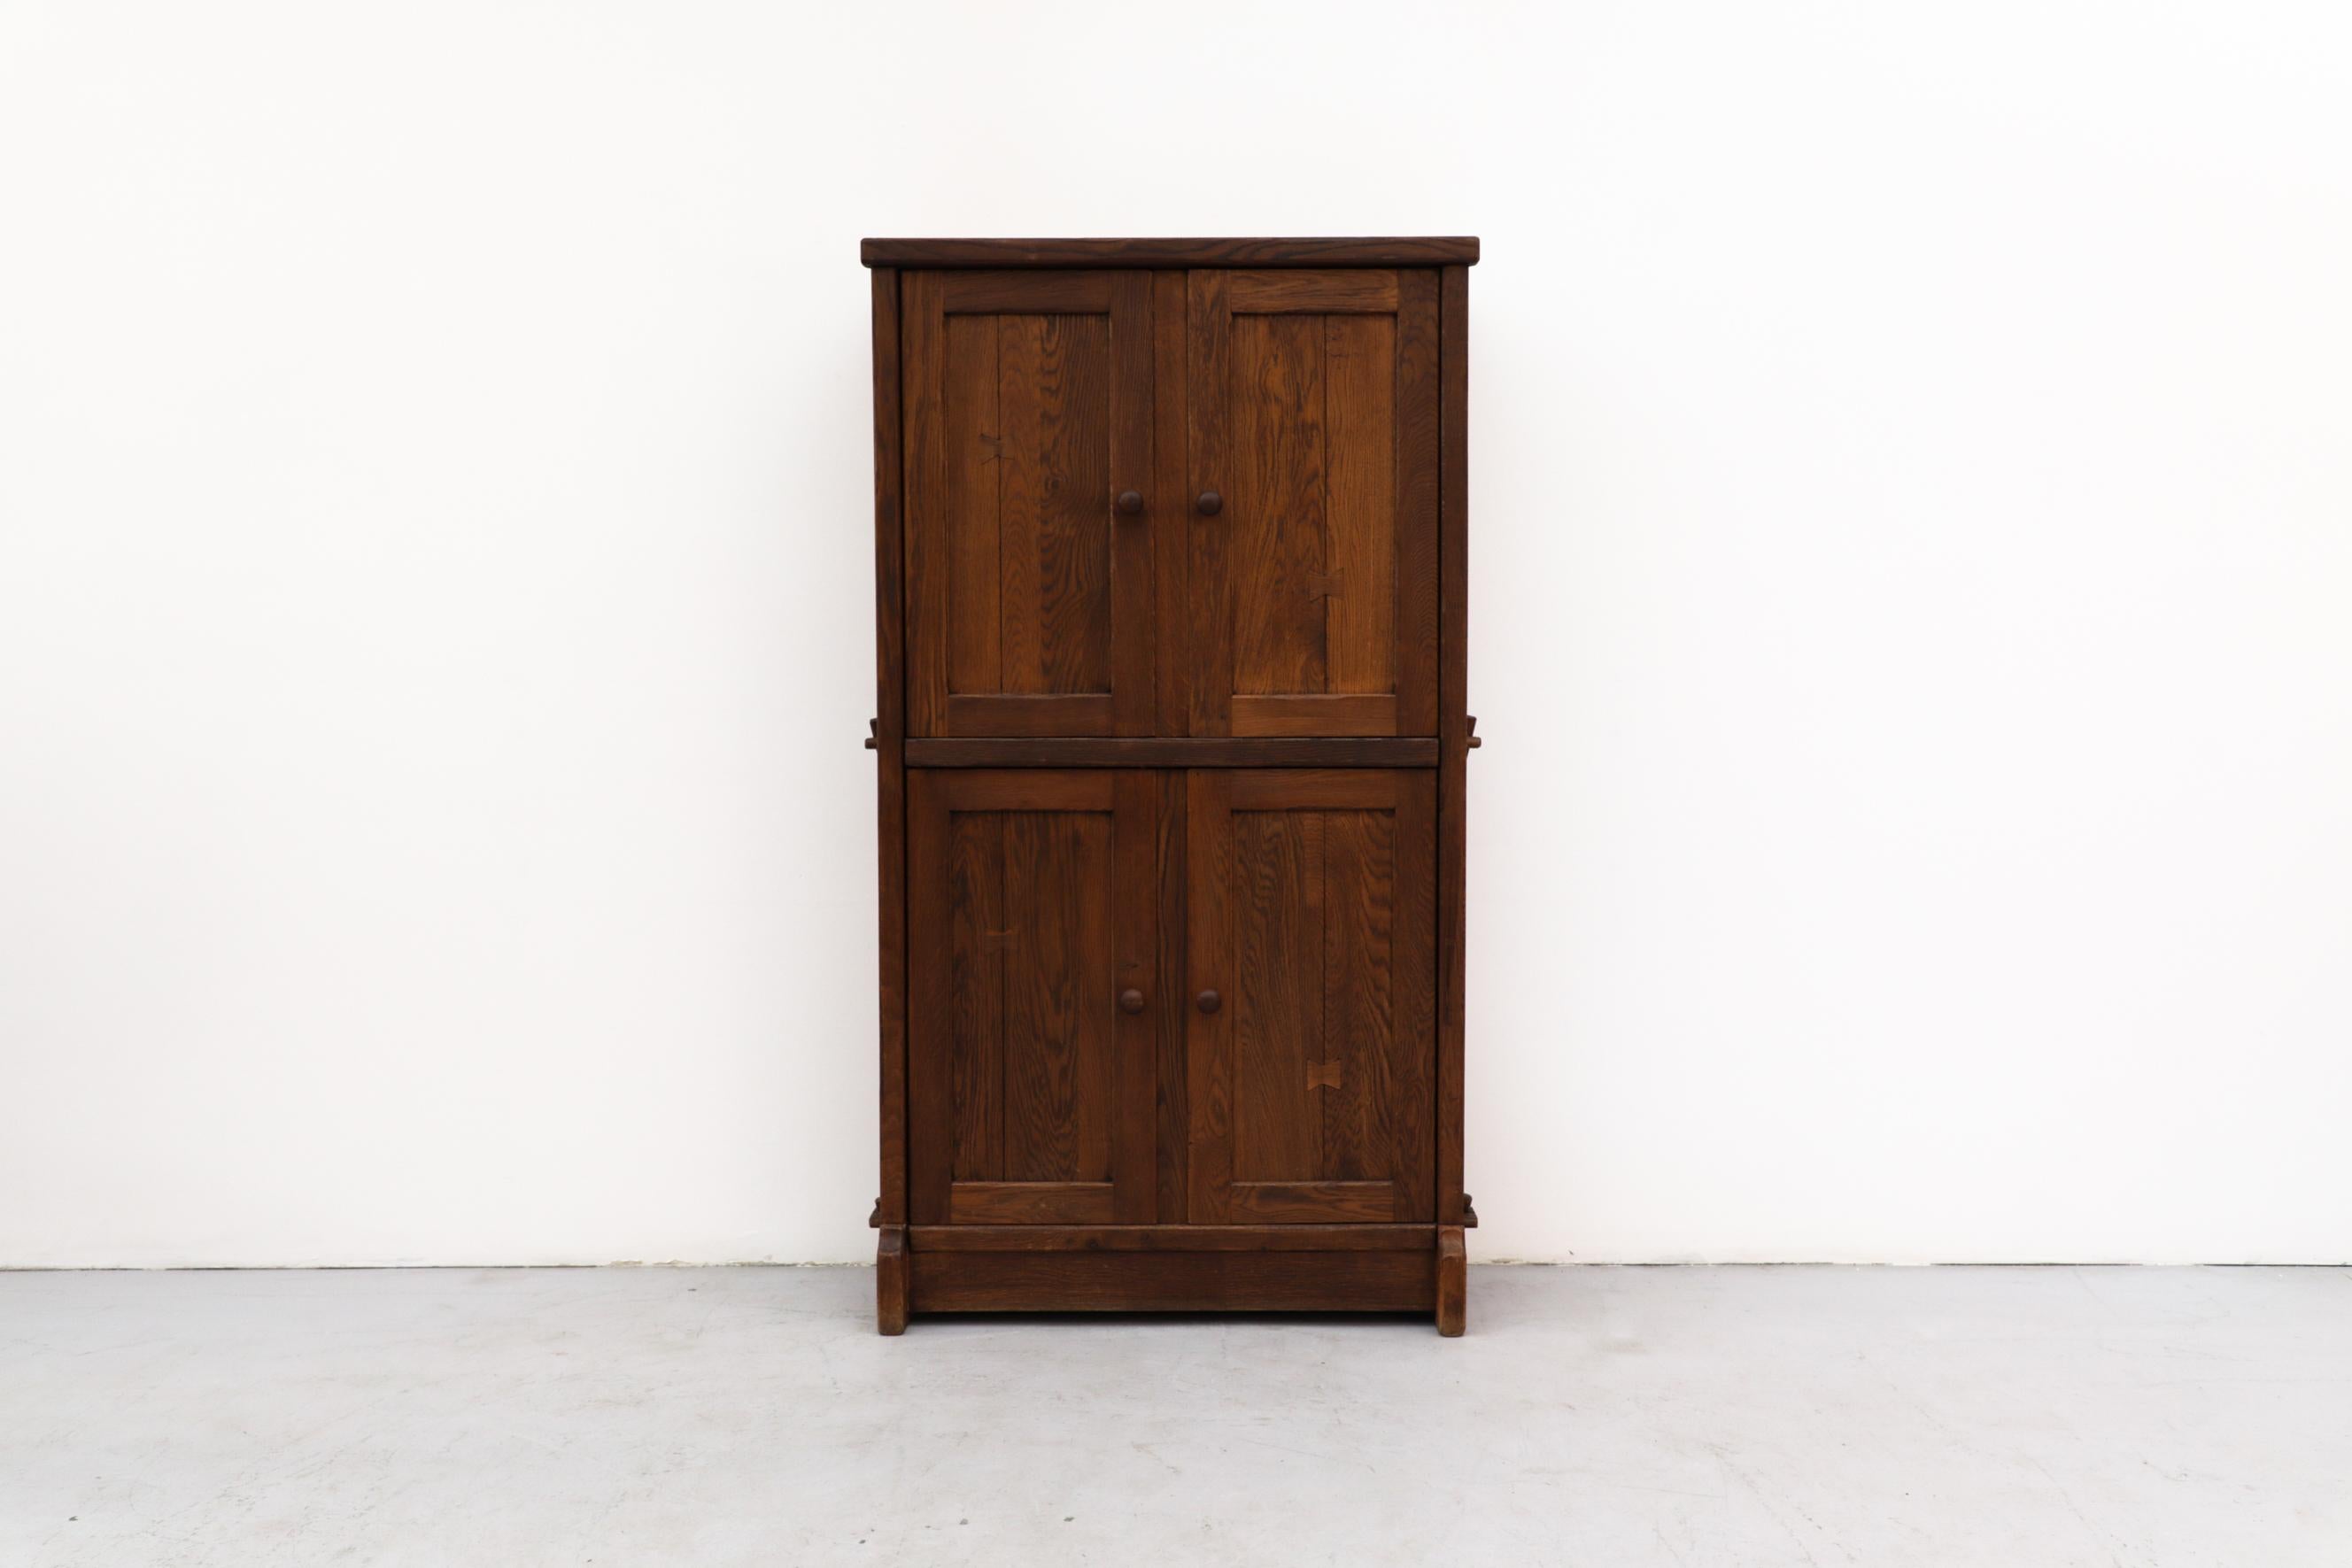 Large Brutalist oak cabinet with upper and lower double doors. In original condition with wear that's consistent with its age and use.